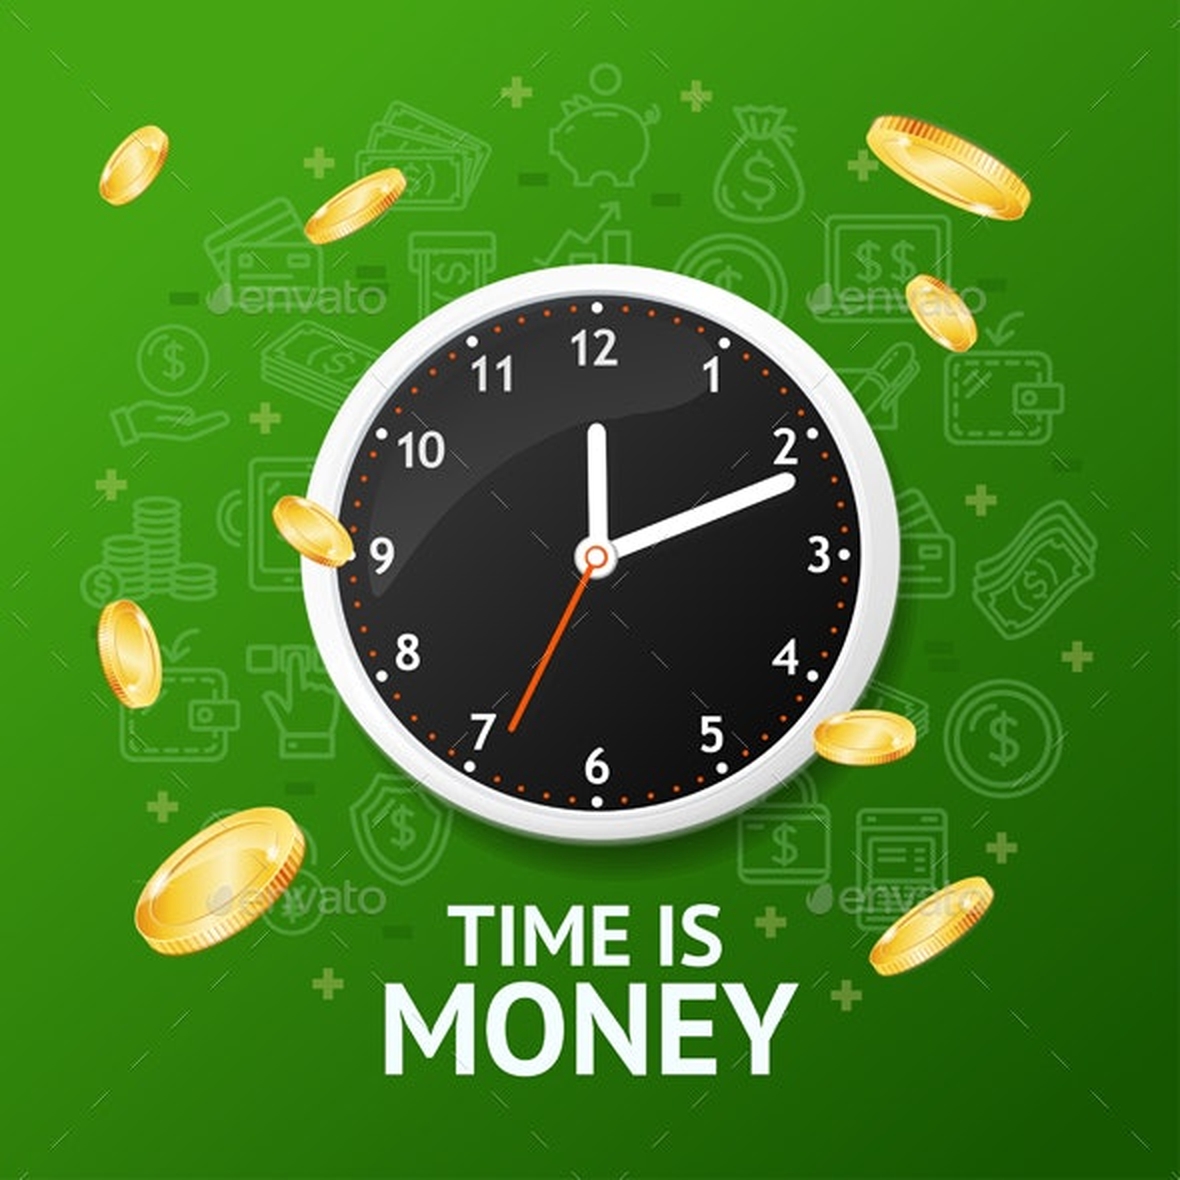 Time is money demo